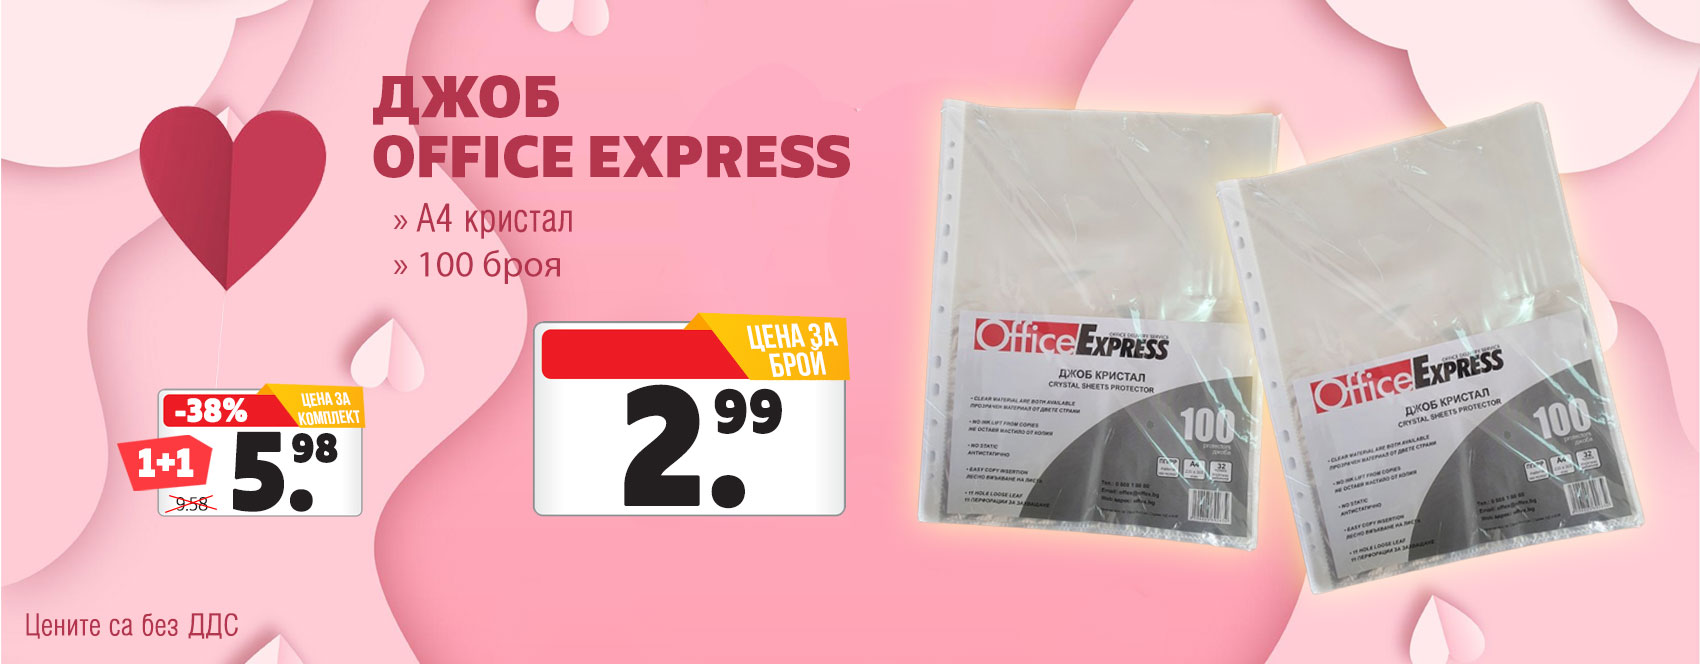 ДЖОБ OFFICE EXPRESS